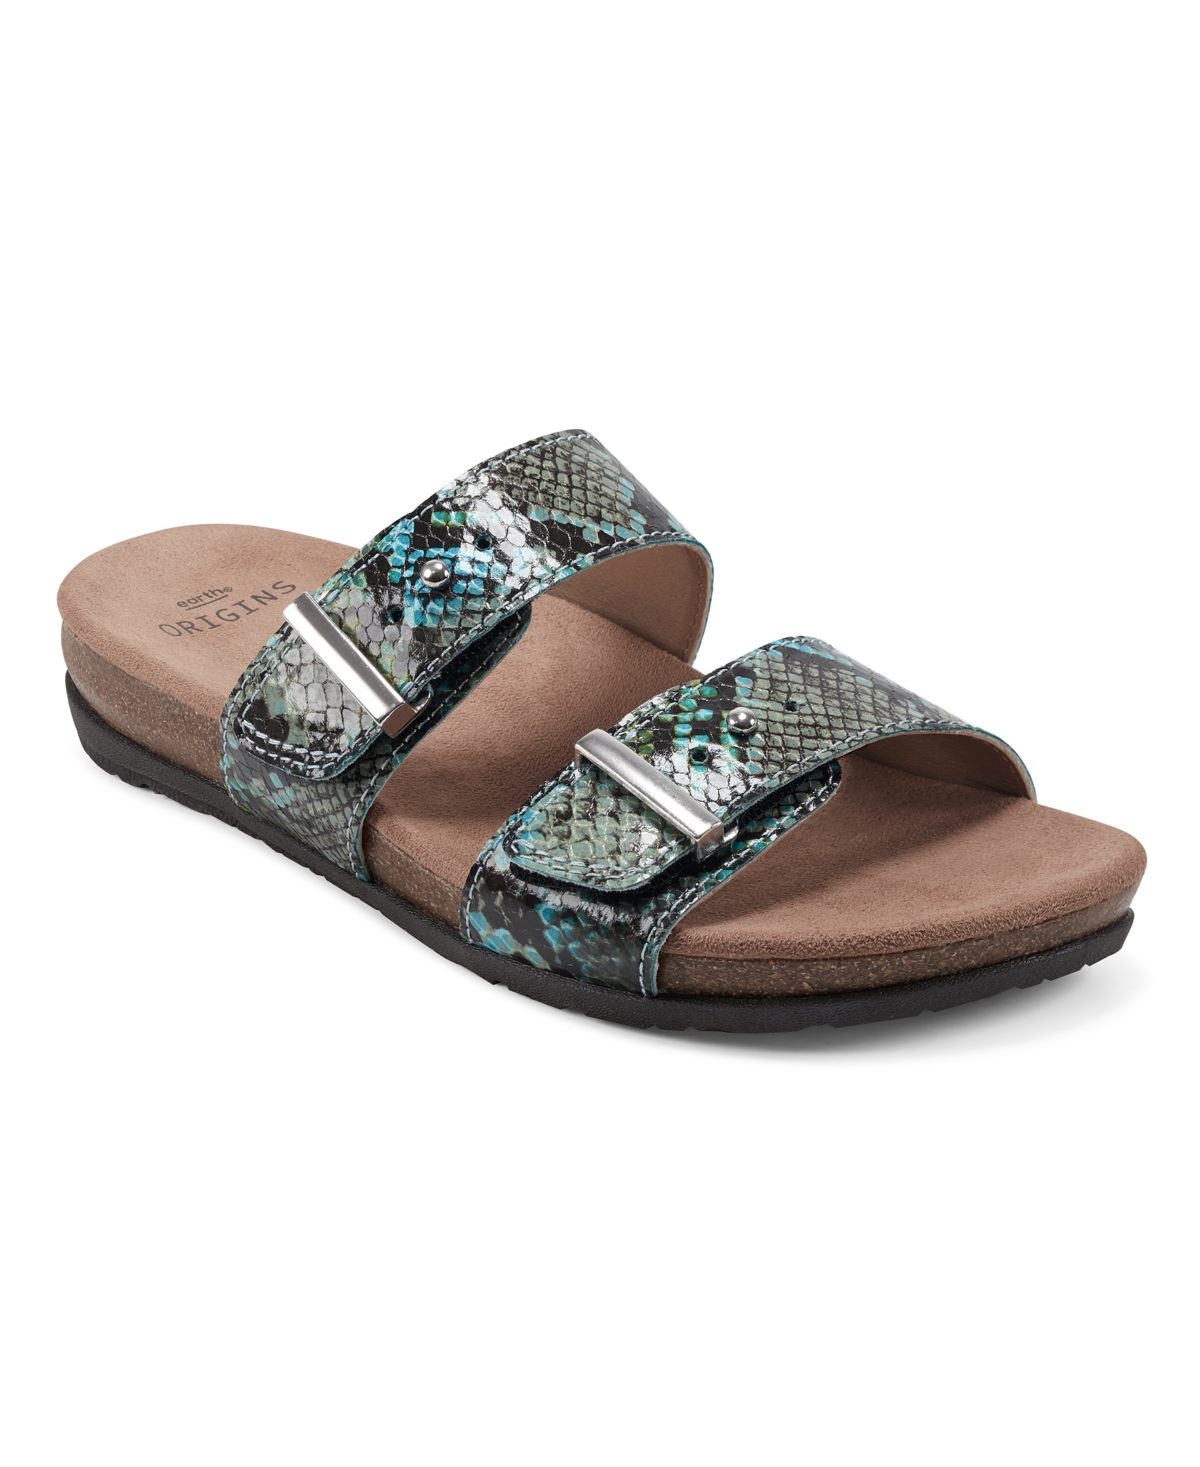 Earth Origins Women's Orra Casual Sandals Women's Shoes In Teal Multi- Synethic